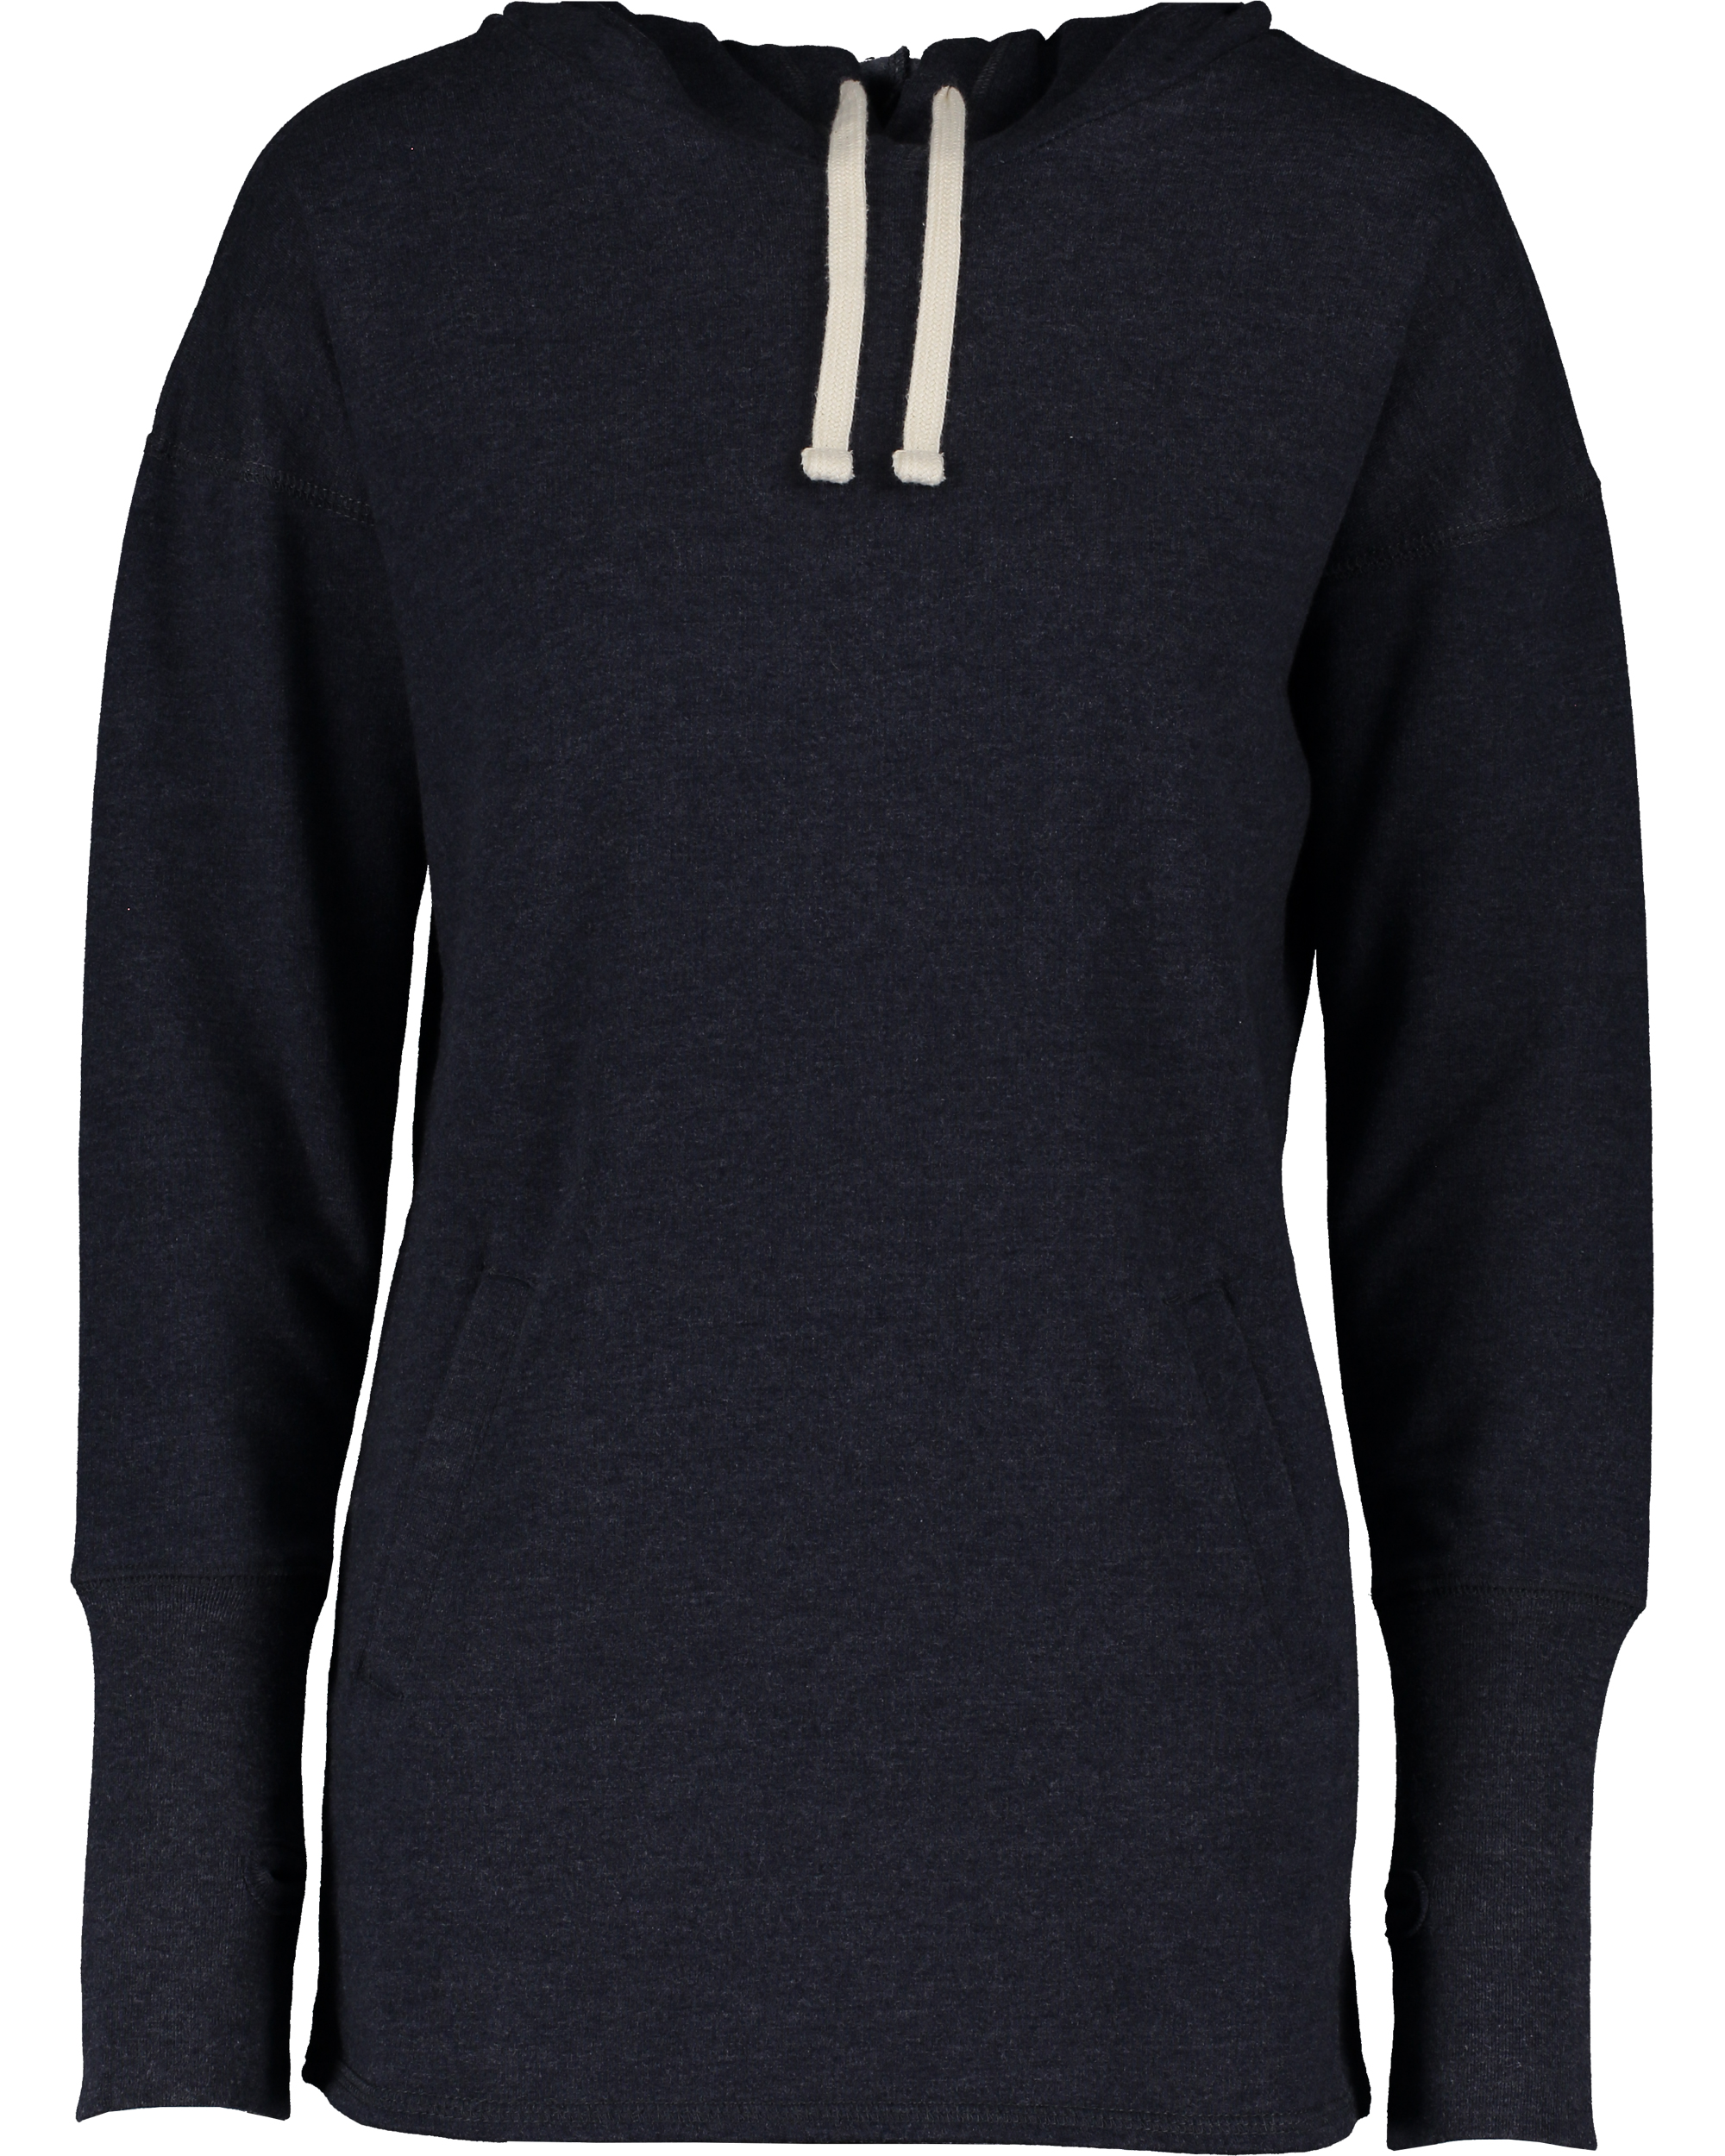 click to view Heather Navy